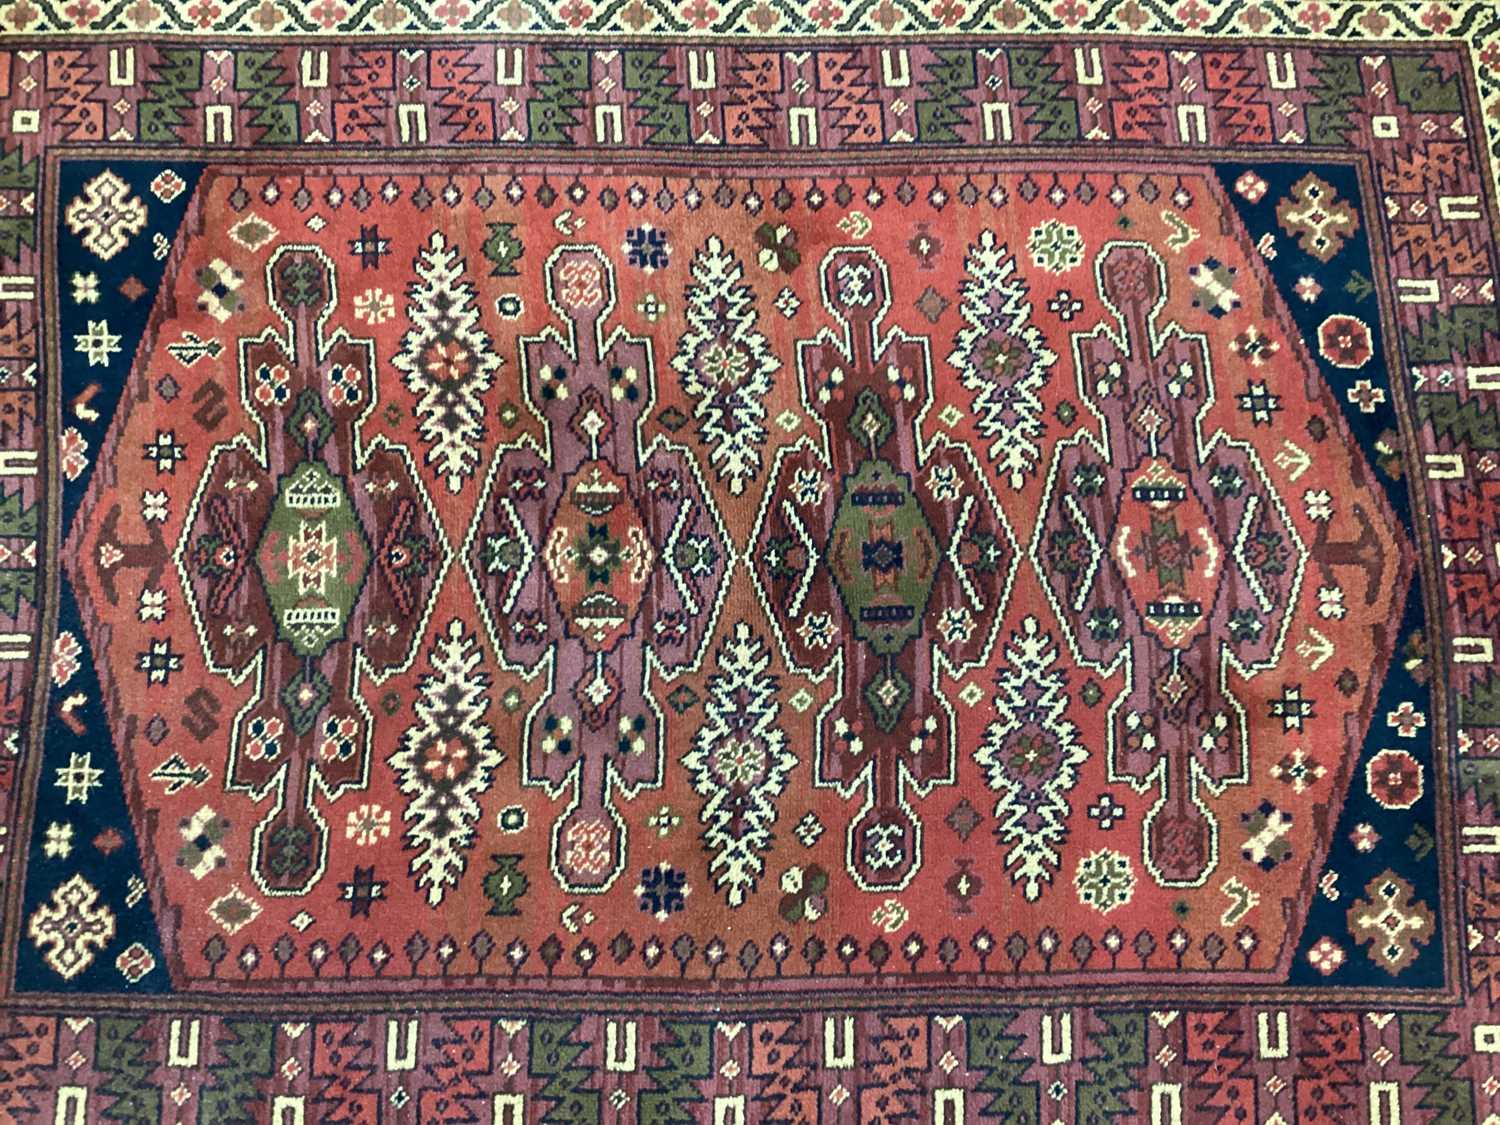 Adedis Kashmir Tassled Woold Rug, with four large elongated central motifs, stylized tree on border, - Image 2 of 4